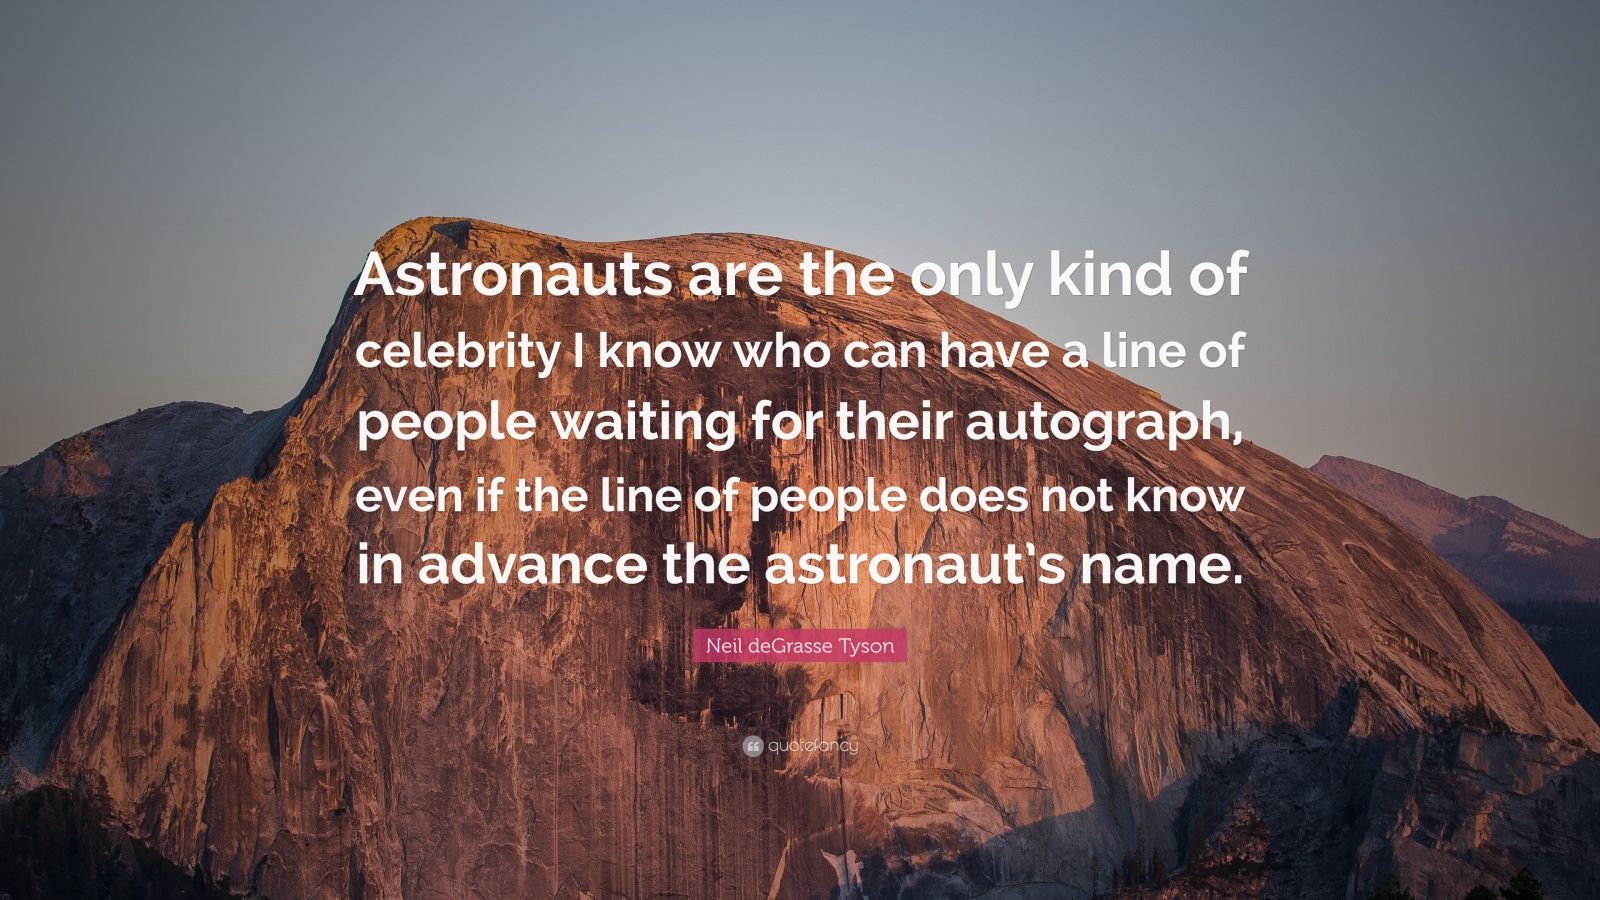 Neil deGrasse Tyson Quote: "Astronauts are the only kind of celebrity I know who can have a line ...